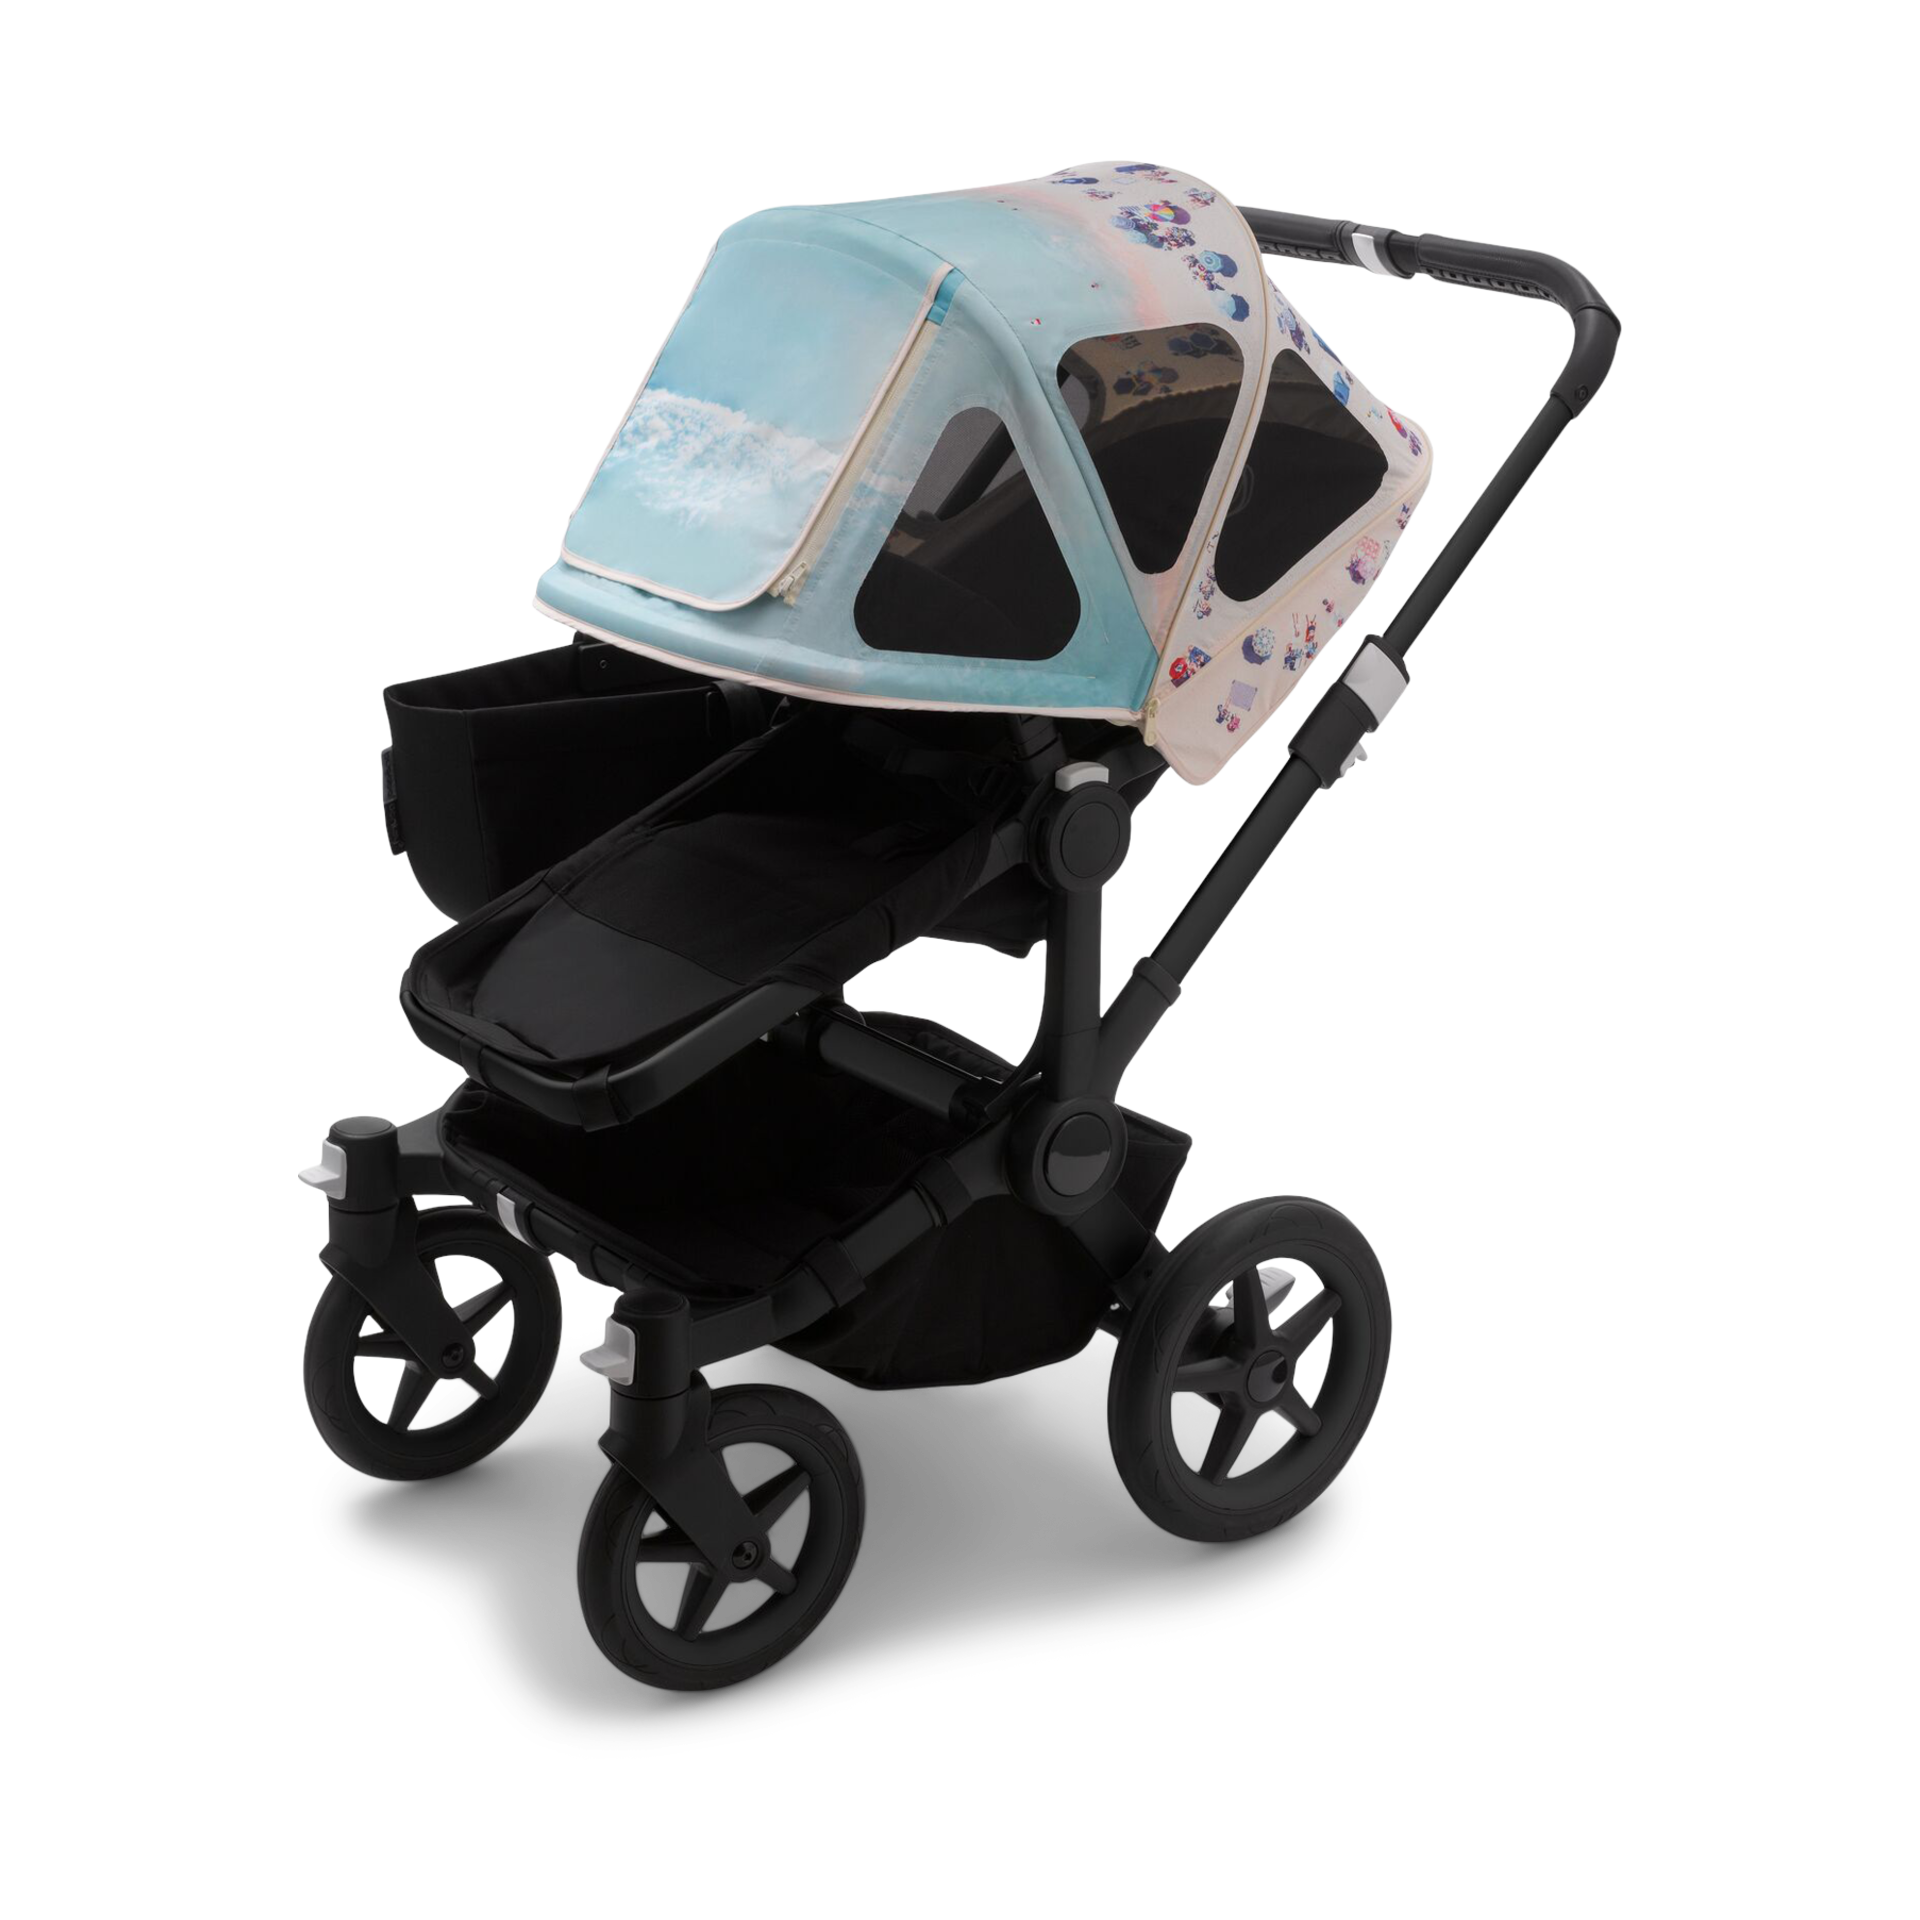 bugaboo breezy sun canopy review